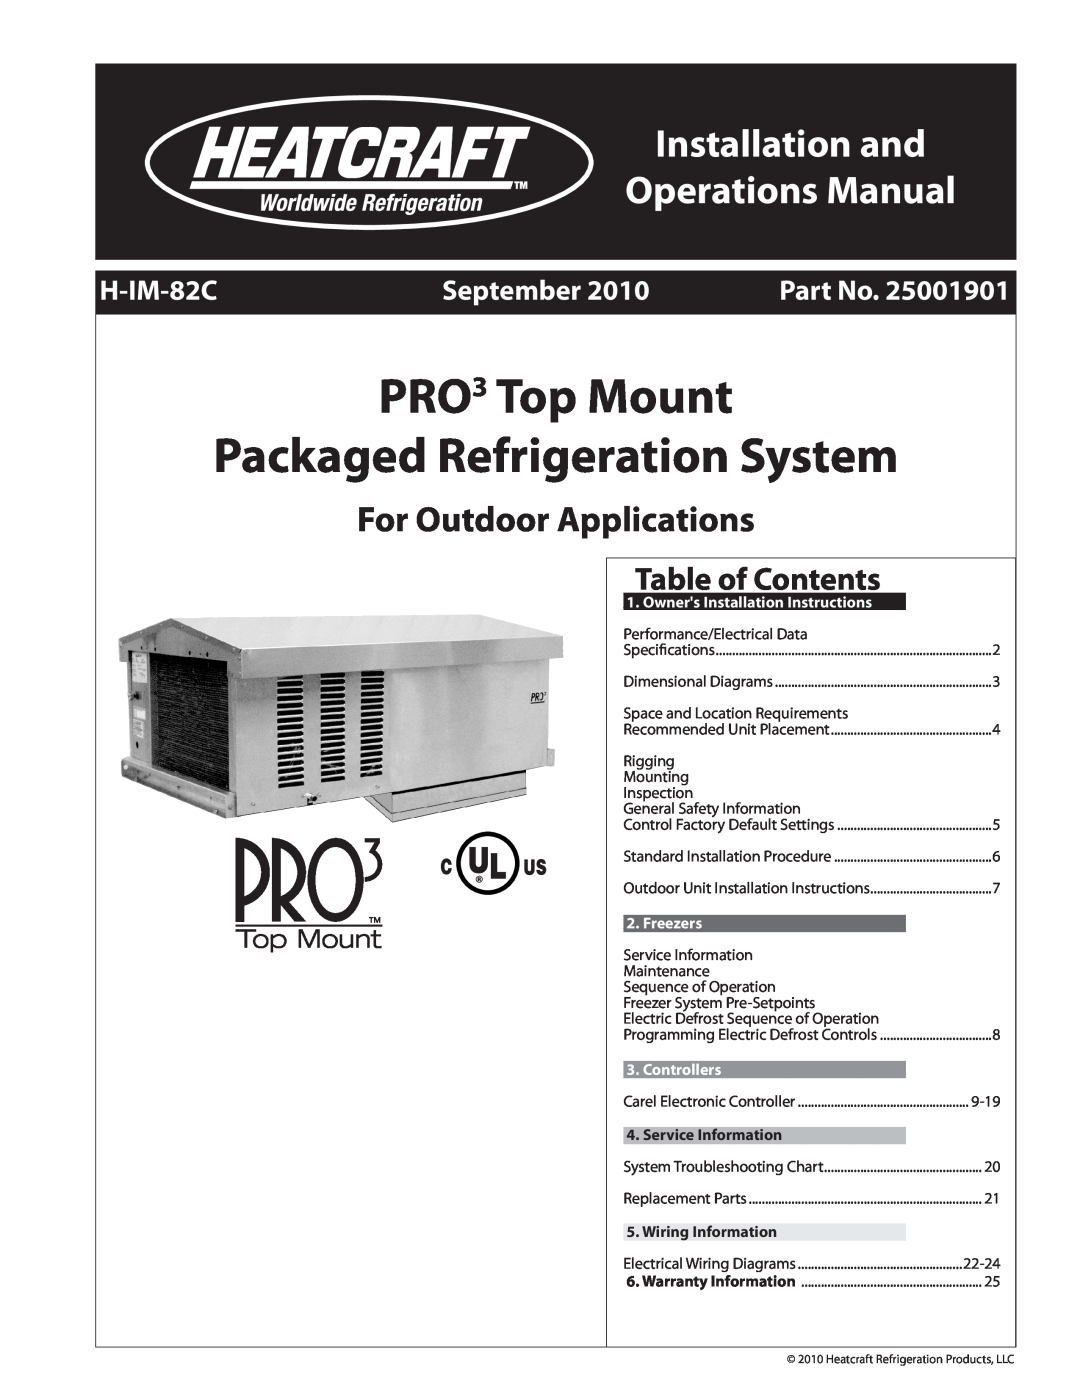 Heatcraft Refrigeration Products H-IM-82C installation instructions Table of Contents, PRO 3 Top Mount, Installation and 